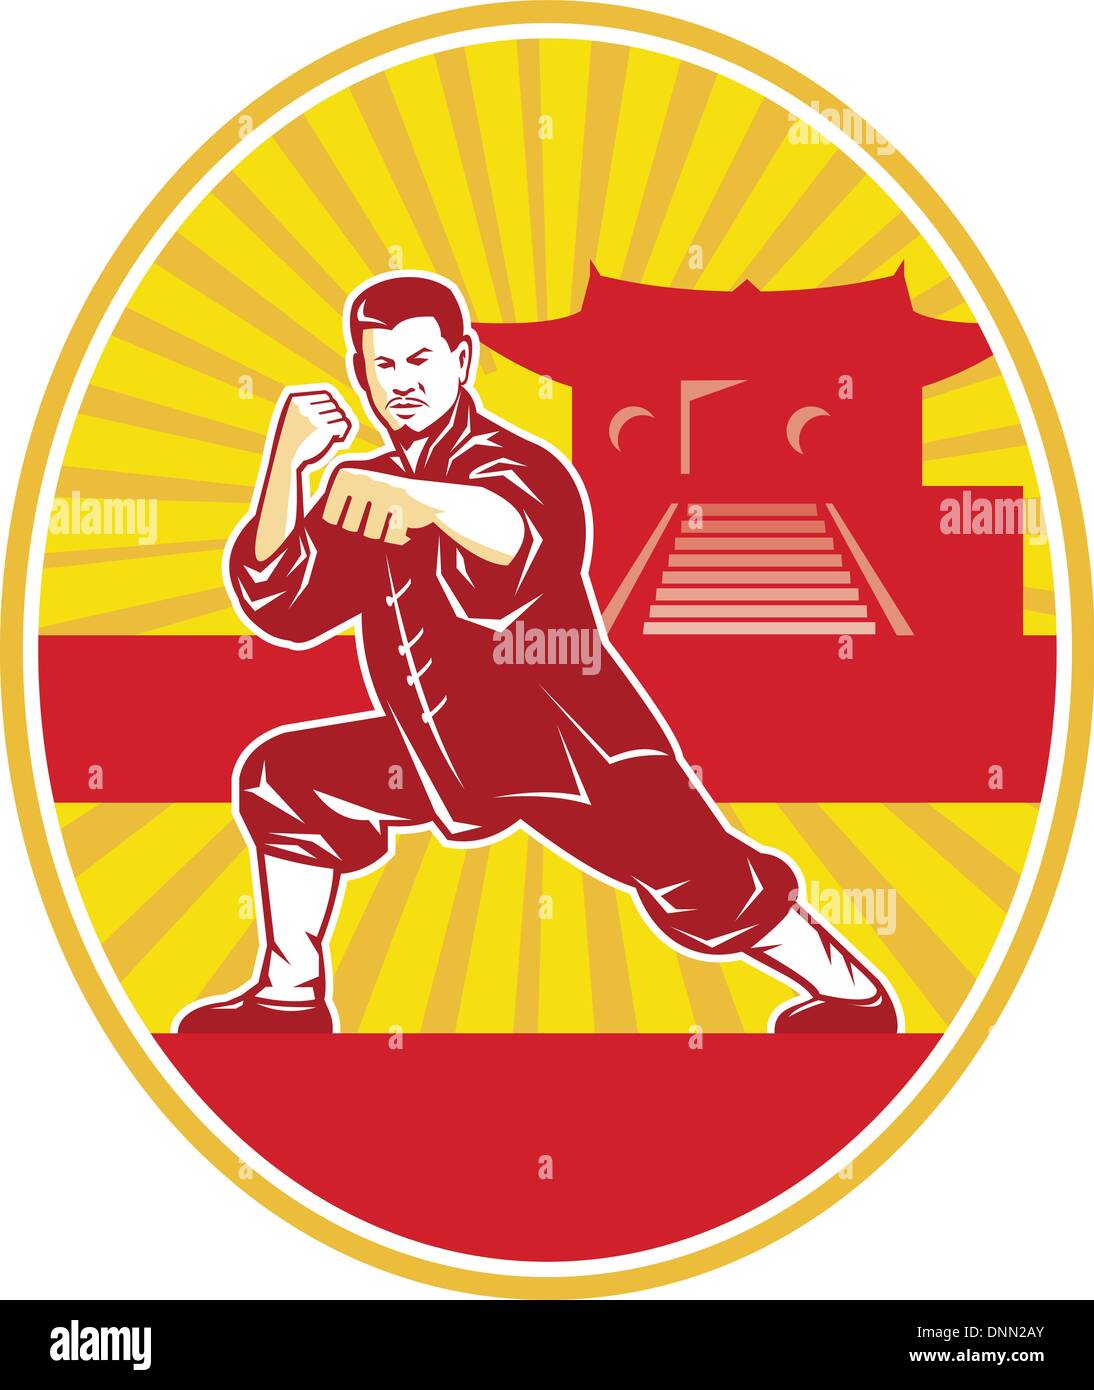 Illustration of shaolin kung fu martial arts karate master in fighting stance with temple and sunburst in background set inside Stock Vector